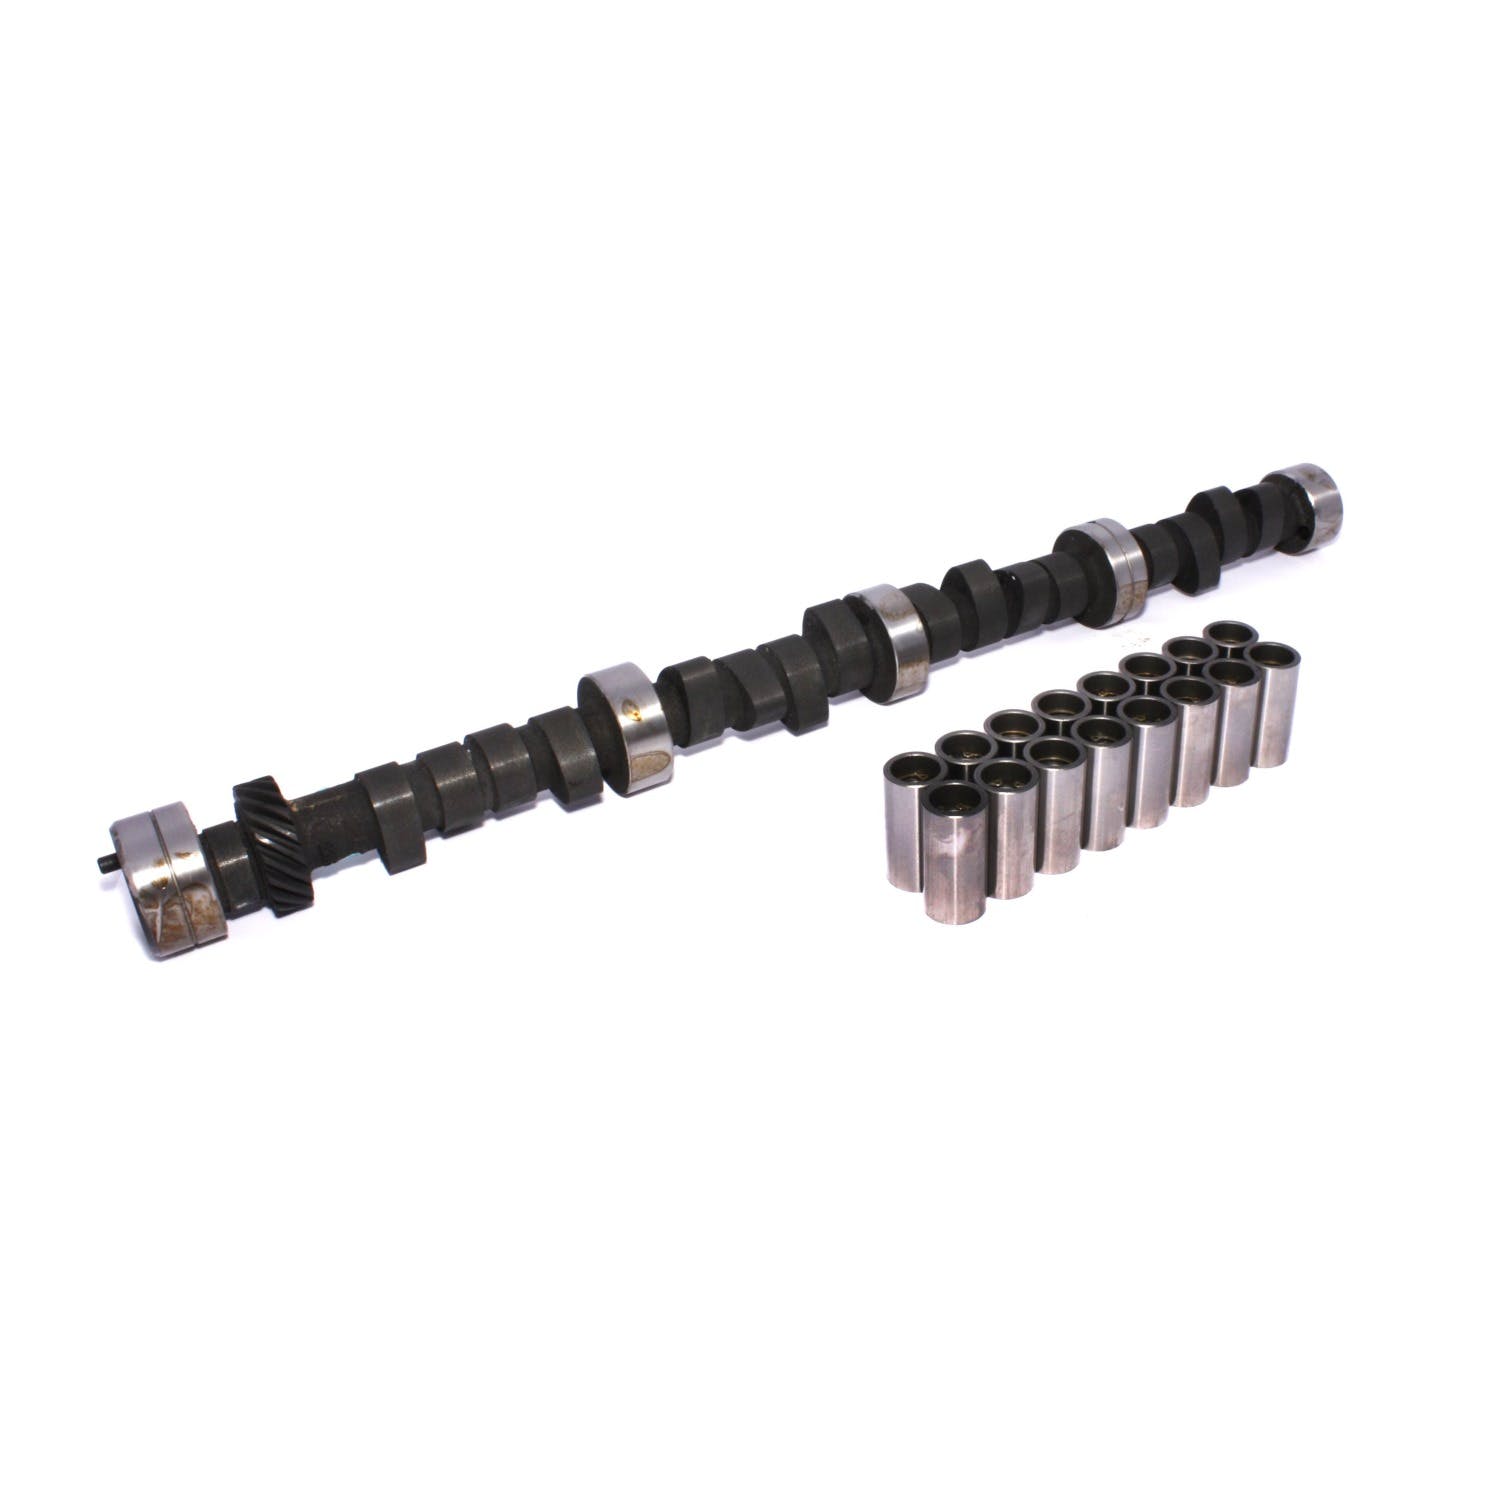 Competition Cams CL24-300-4 Drag Race Camshaft/Lifter Kit